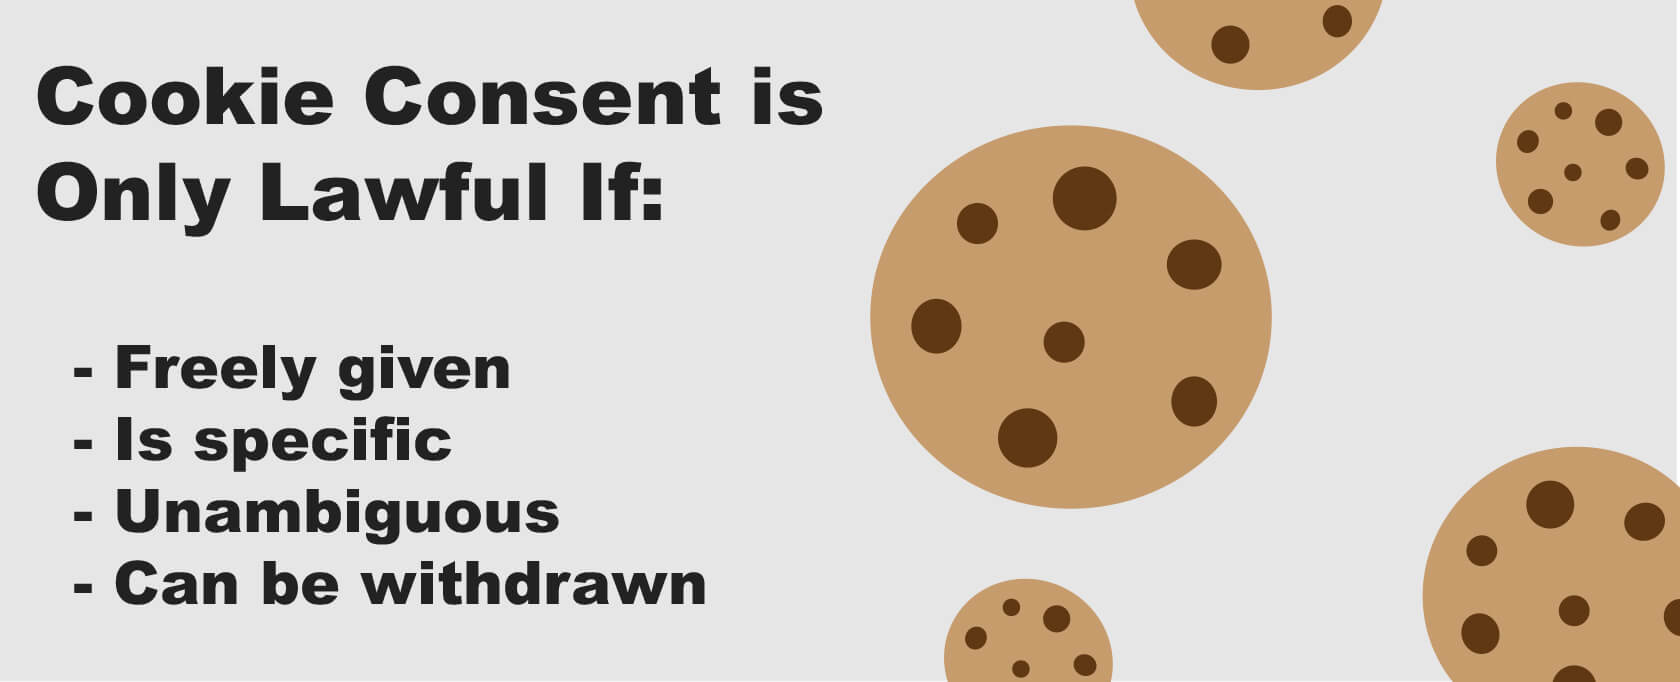 Valid Cookie Consent